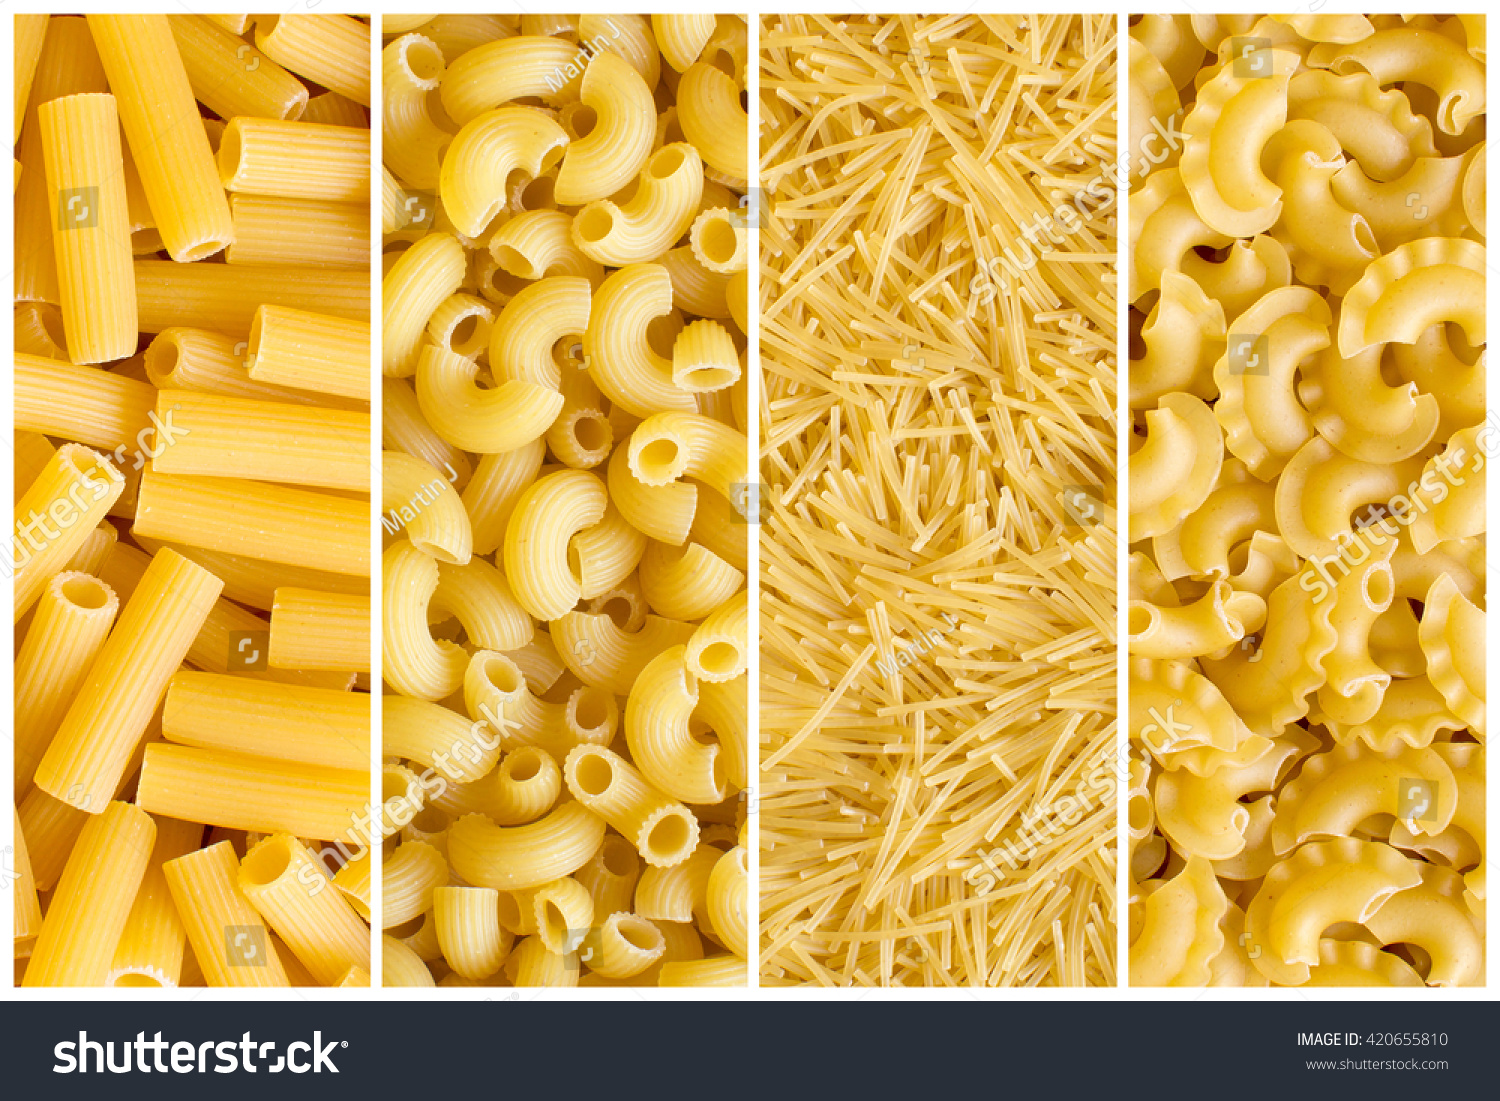 Download Collage Various Raw Yellow Pasta Backgrounds Stock Photo Edit Now 420655810 PSD Mockup Templates